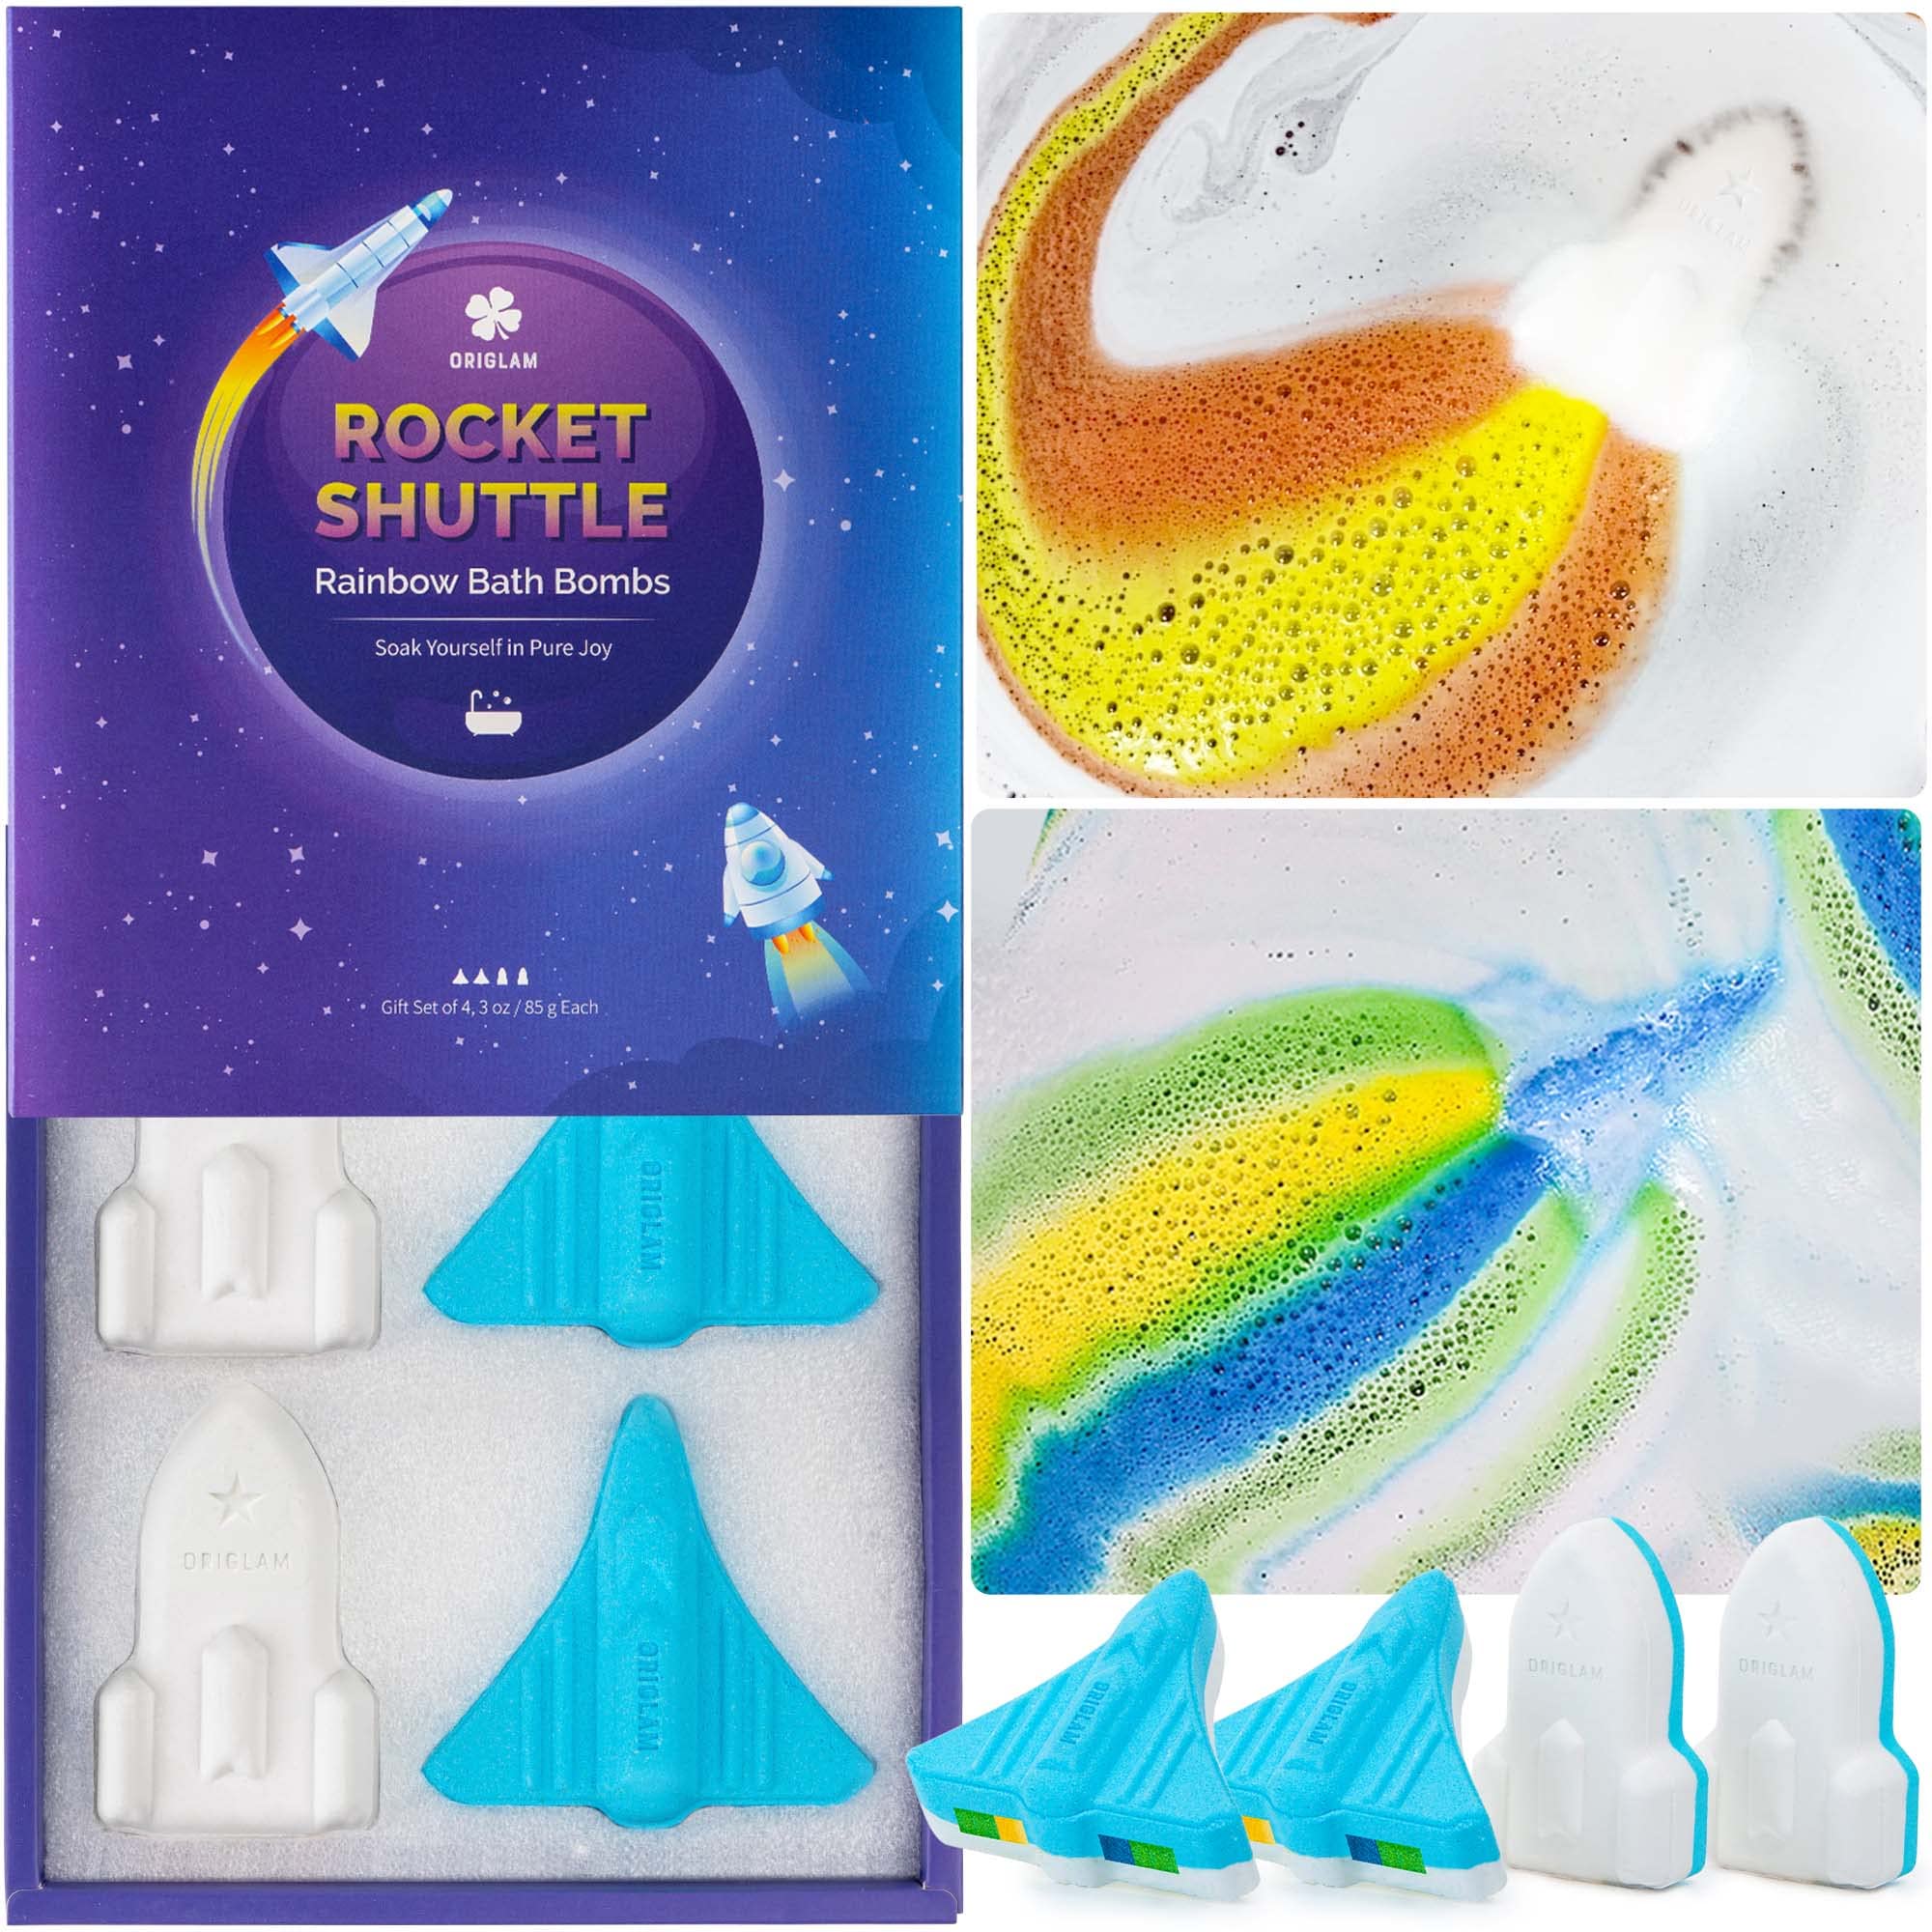 ORIGLAM Bath Bombs for Kids Space Shuttle & Rocket Bath Bombs with